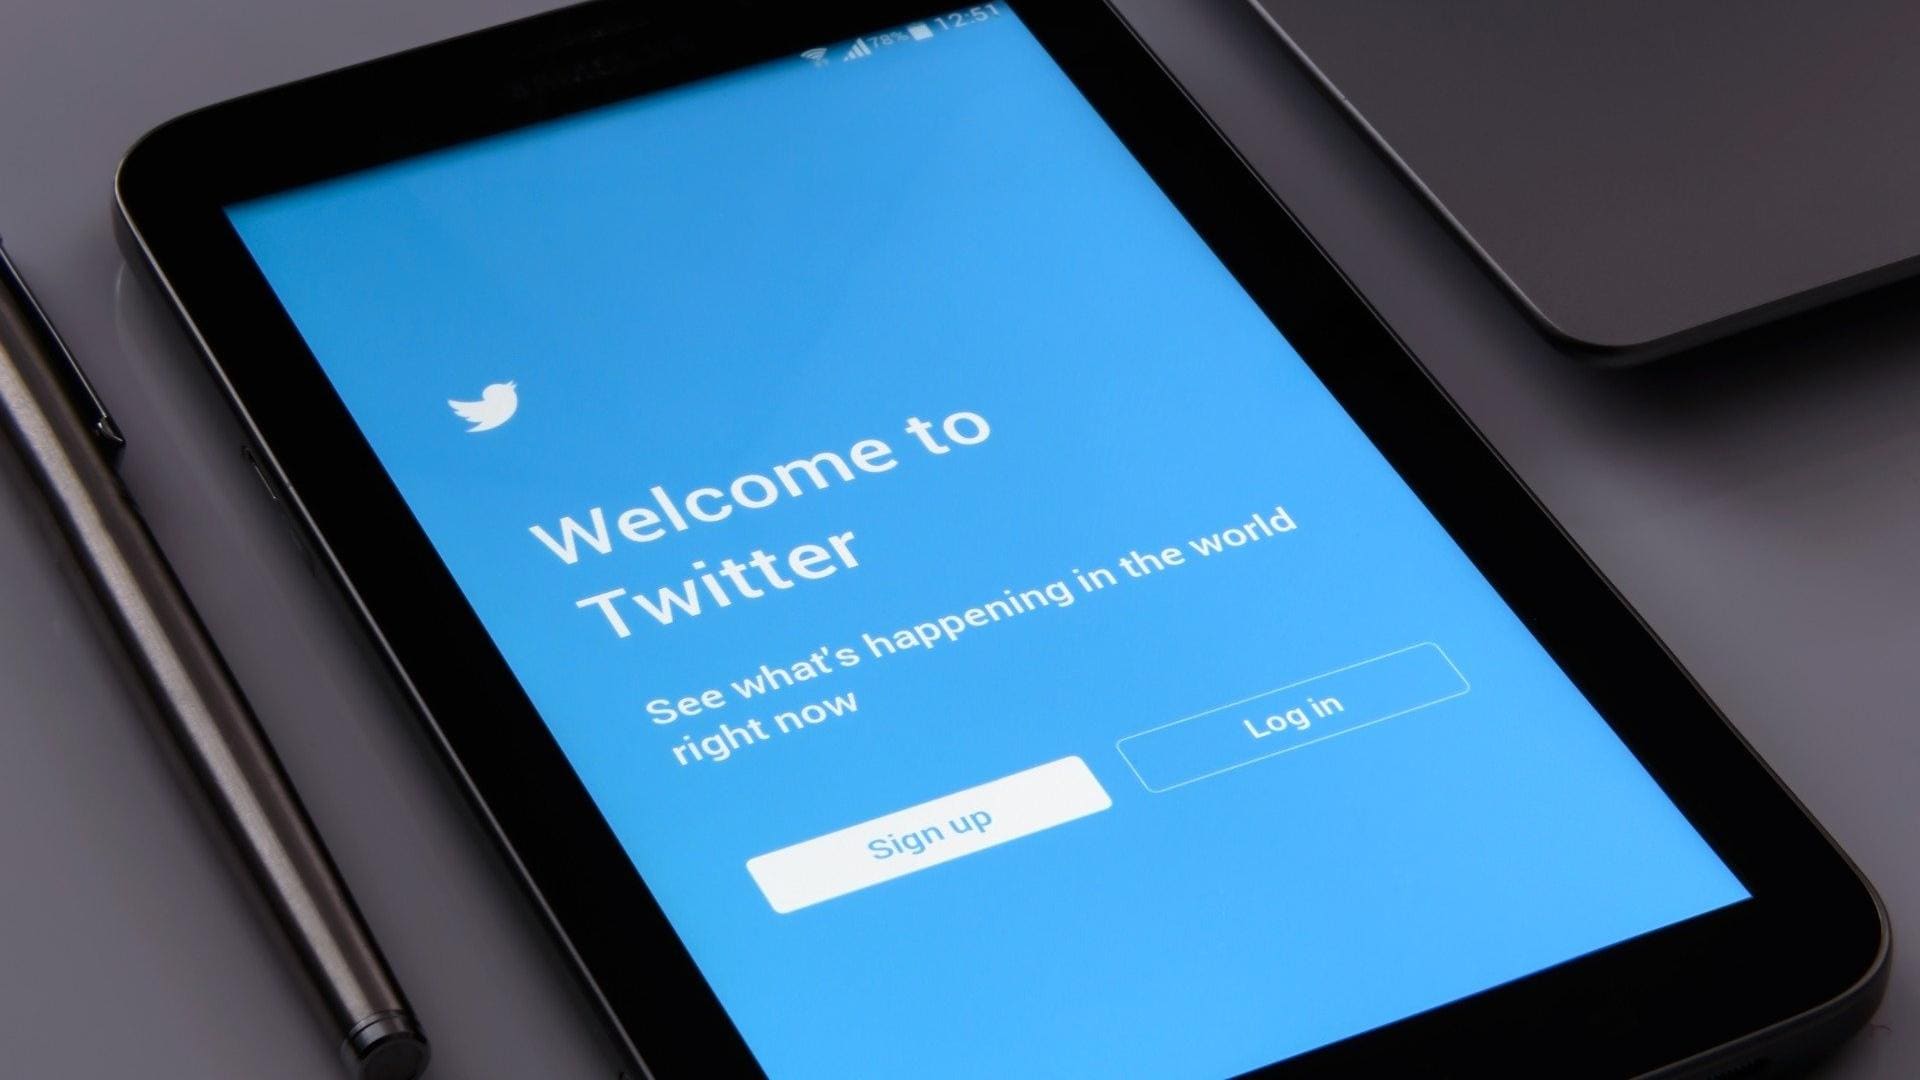 COVID-19 Help Tweets Grew 1958 Percent in April-May - Technology News, Firstpost